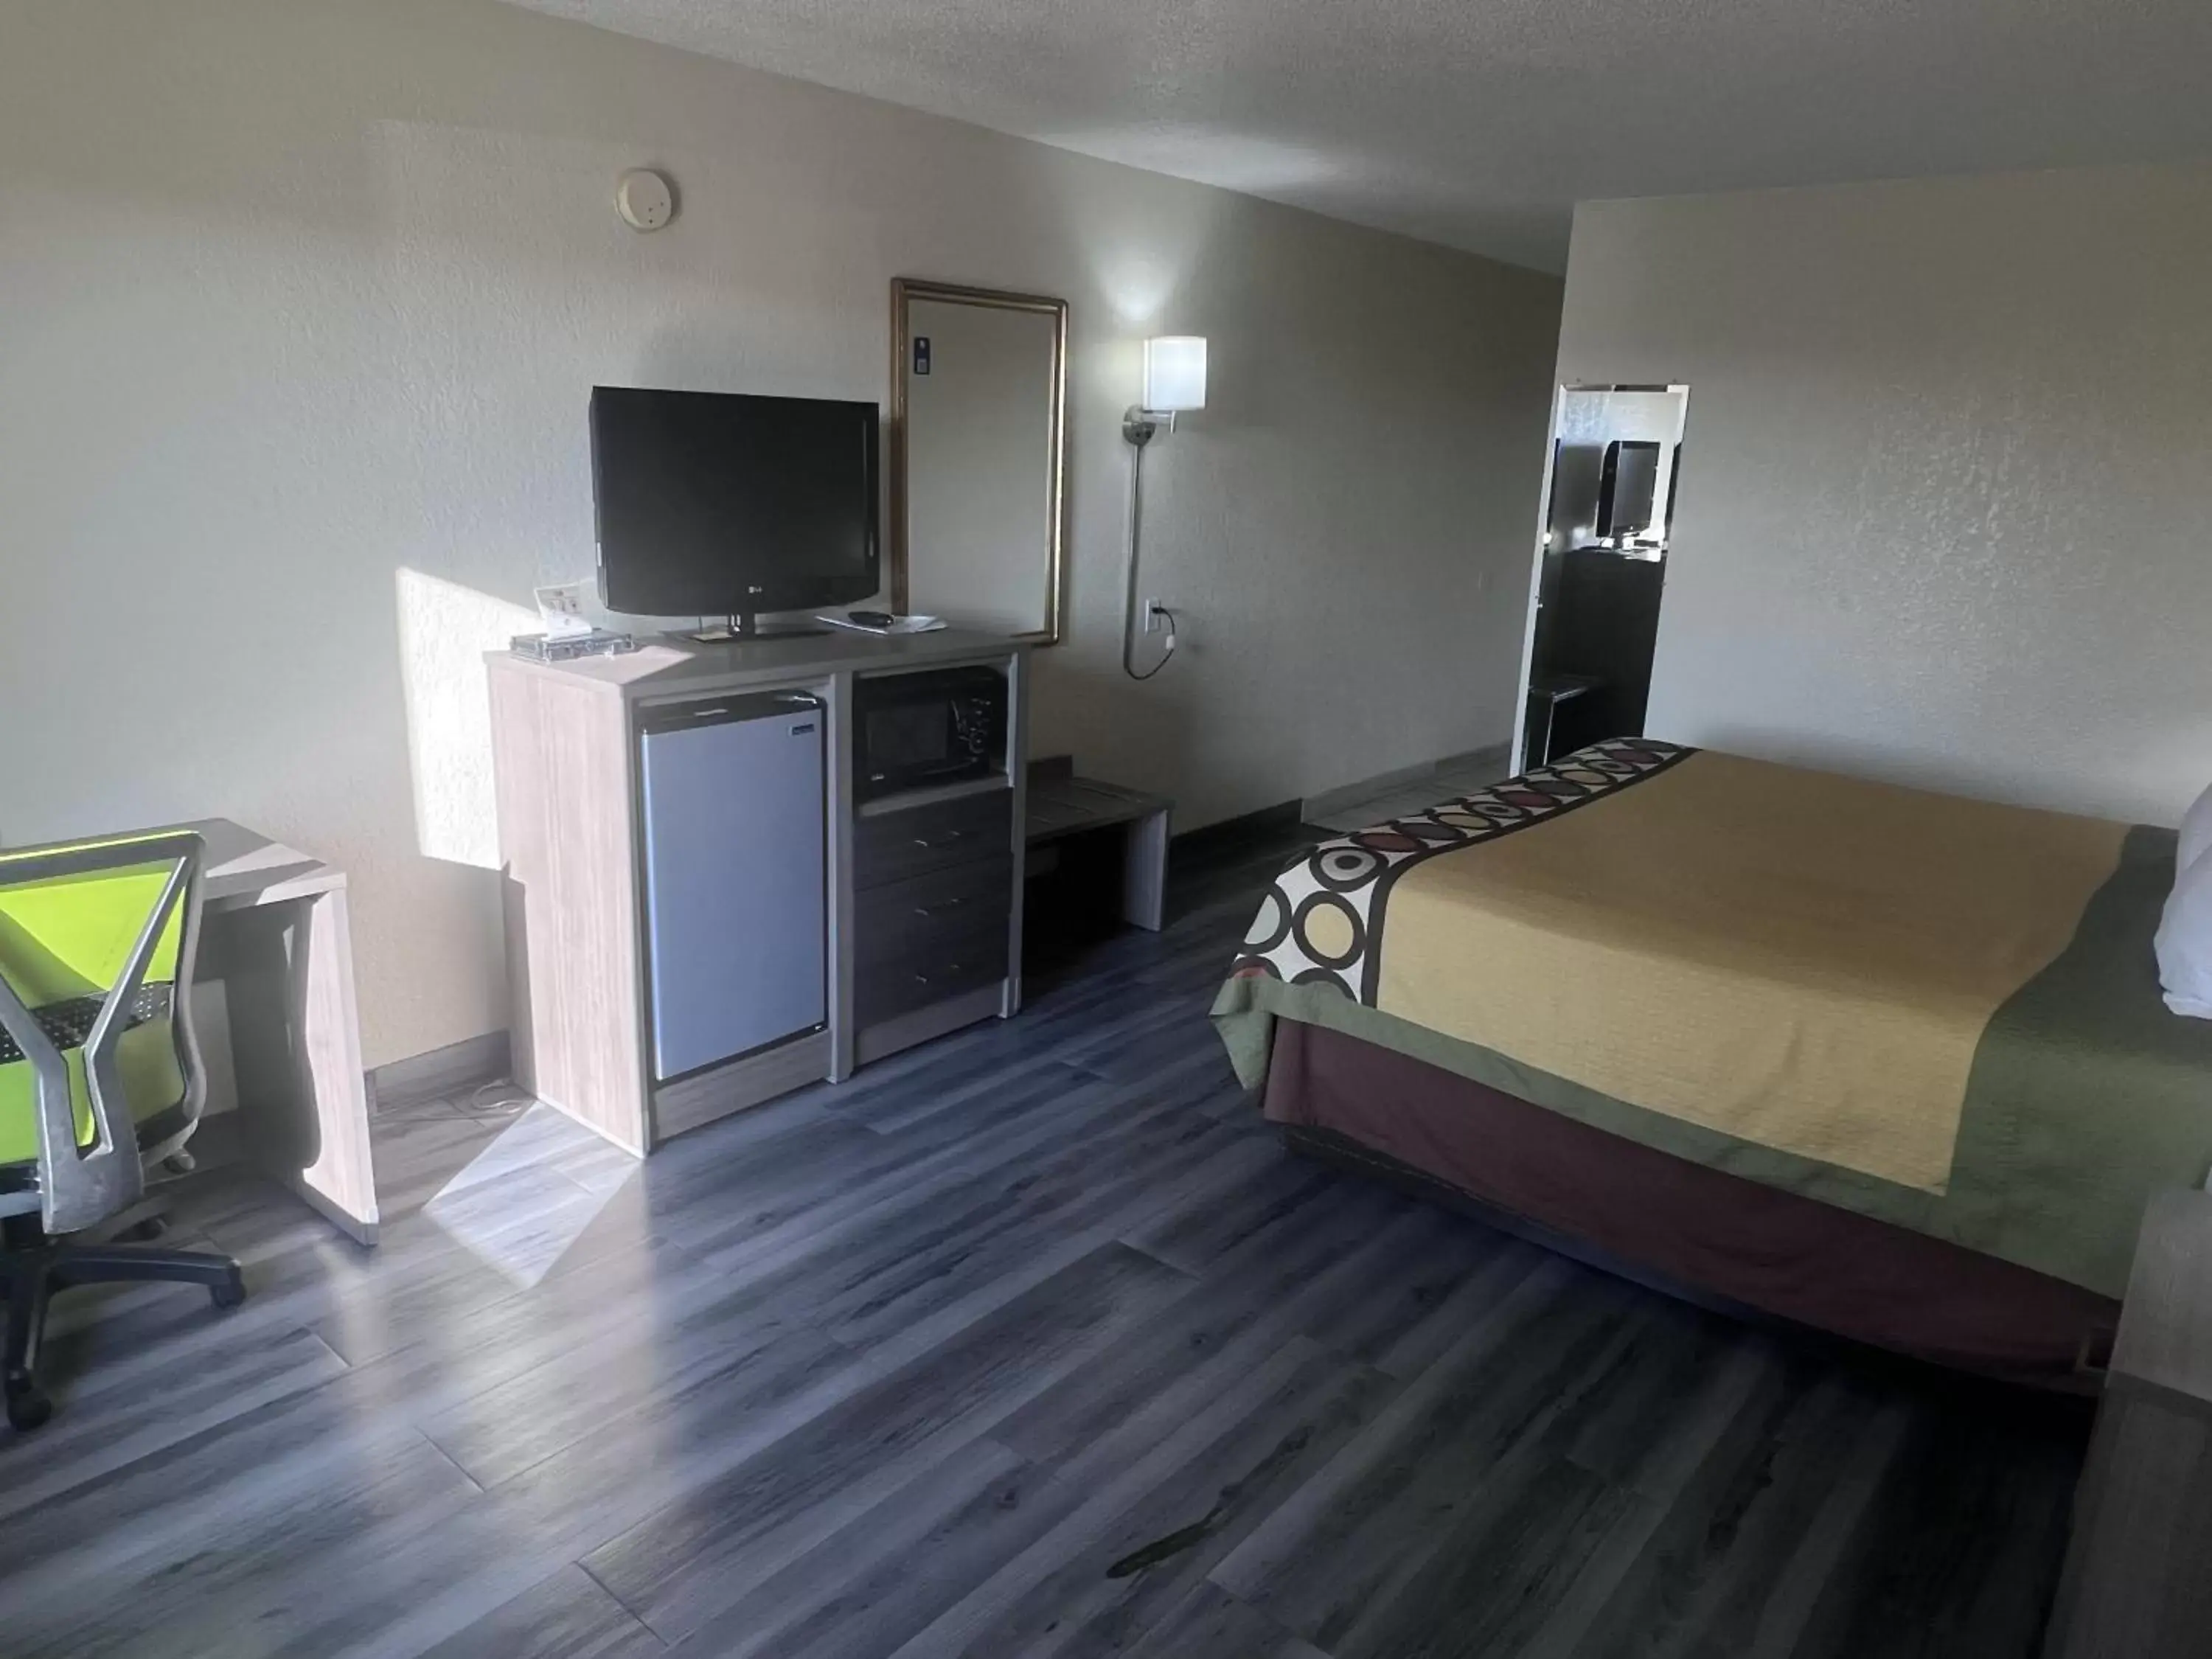 Bed in Super 8 by Wyndham Ft Stockton